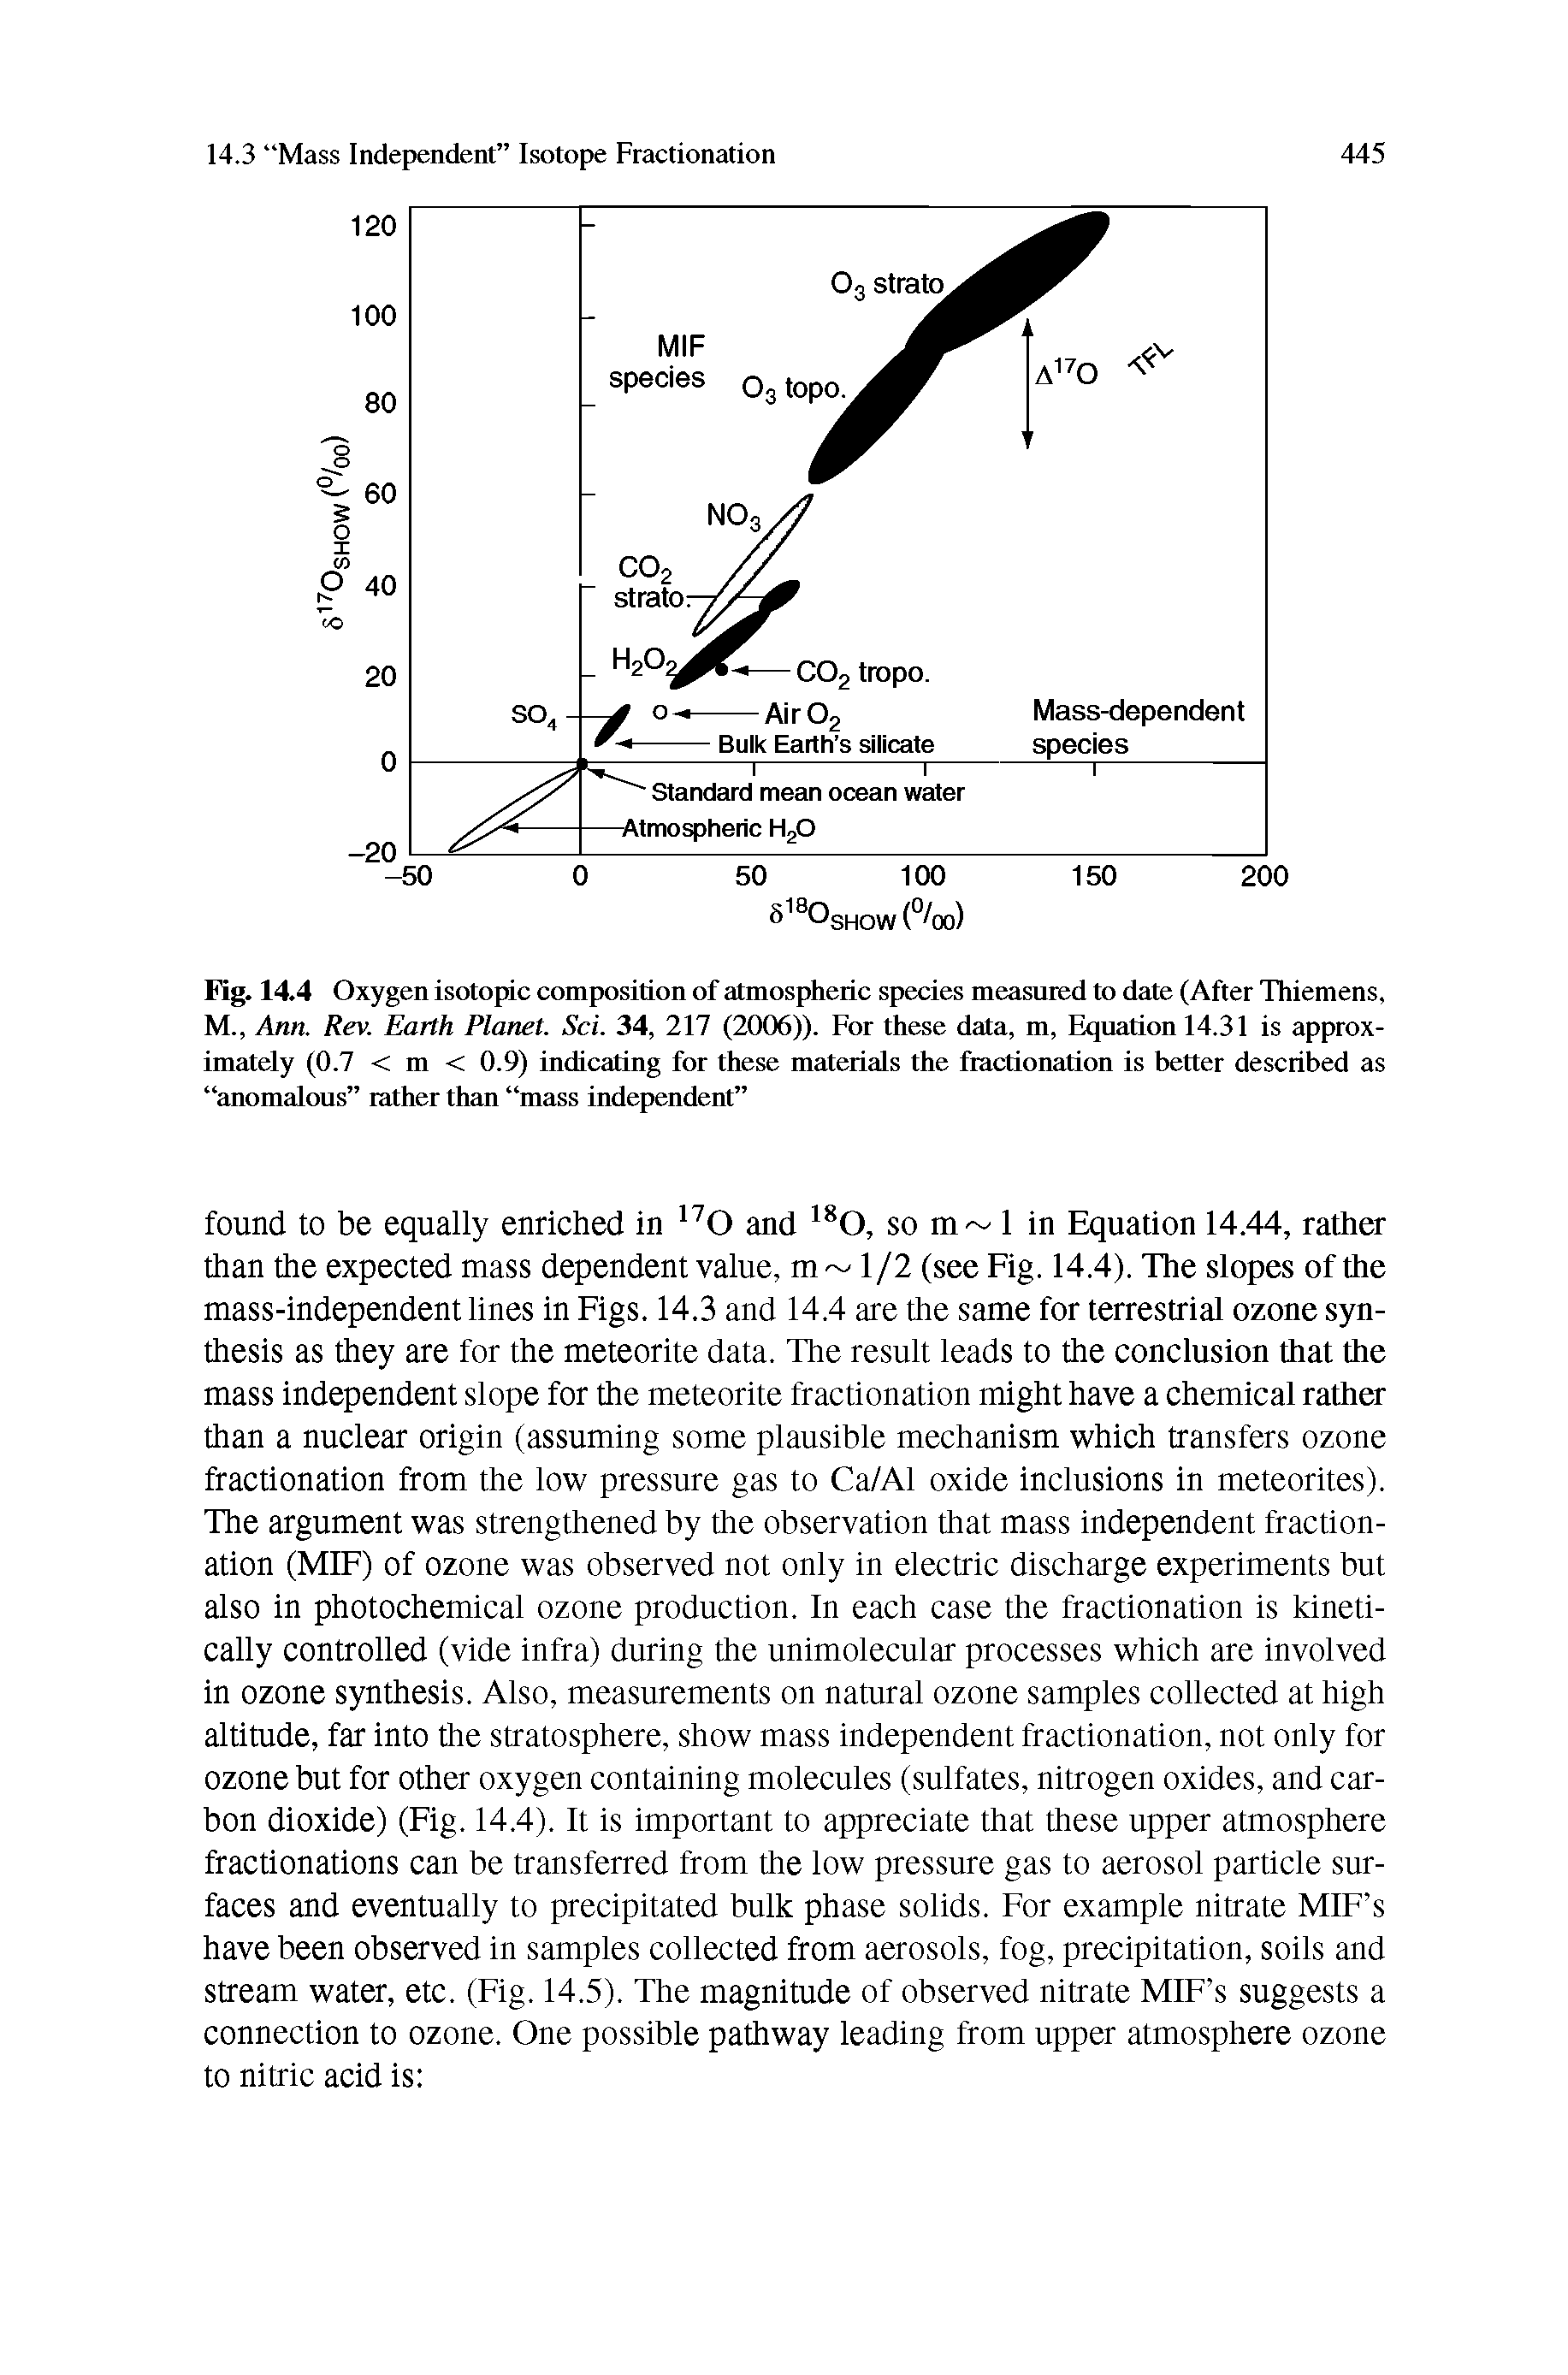 Fig. 14.4 Oxygen isotopic composition of atmospheric species measured to date (After Thiemens, M., Ann. Rev. Earth Planet. Sci. 34, 217 (2006)). For these data, m, Equation 14.31 is approximately (0.7 < m < 0.9) indicating for these materials the fractionation is better described as anomalous rather than mass independent ...